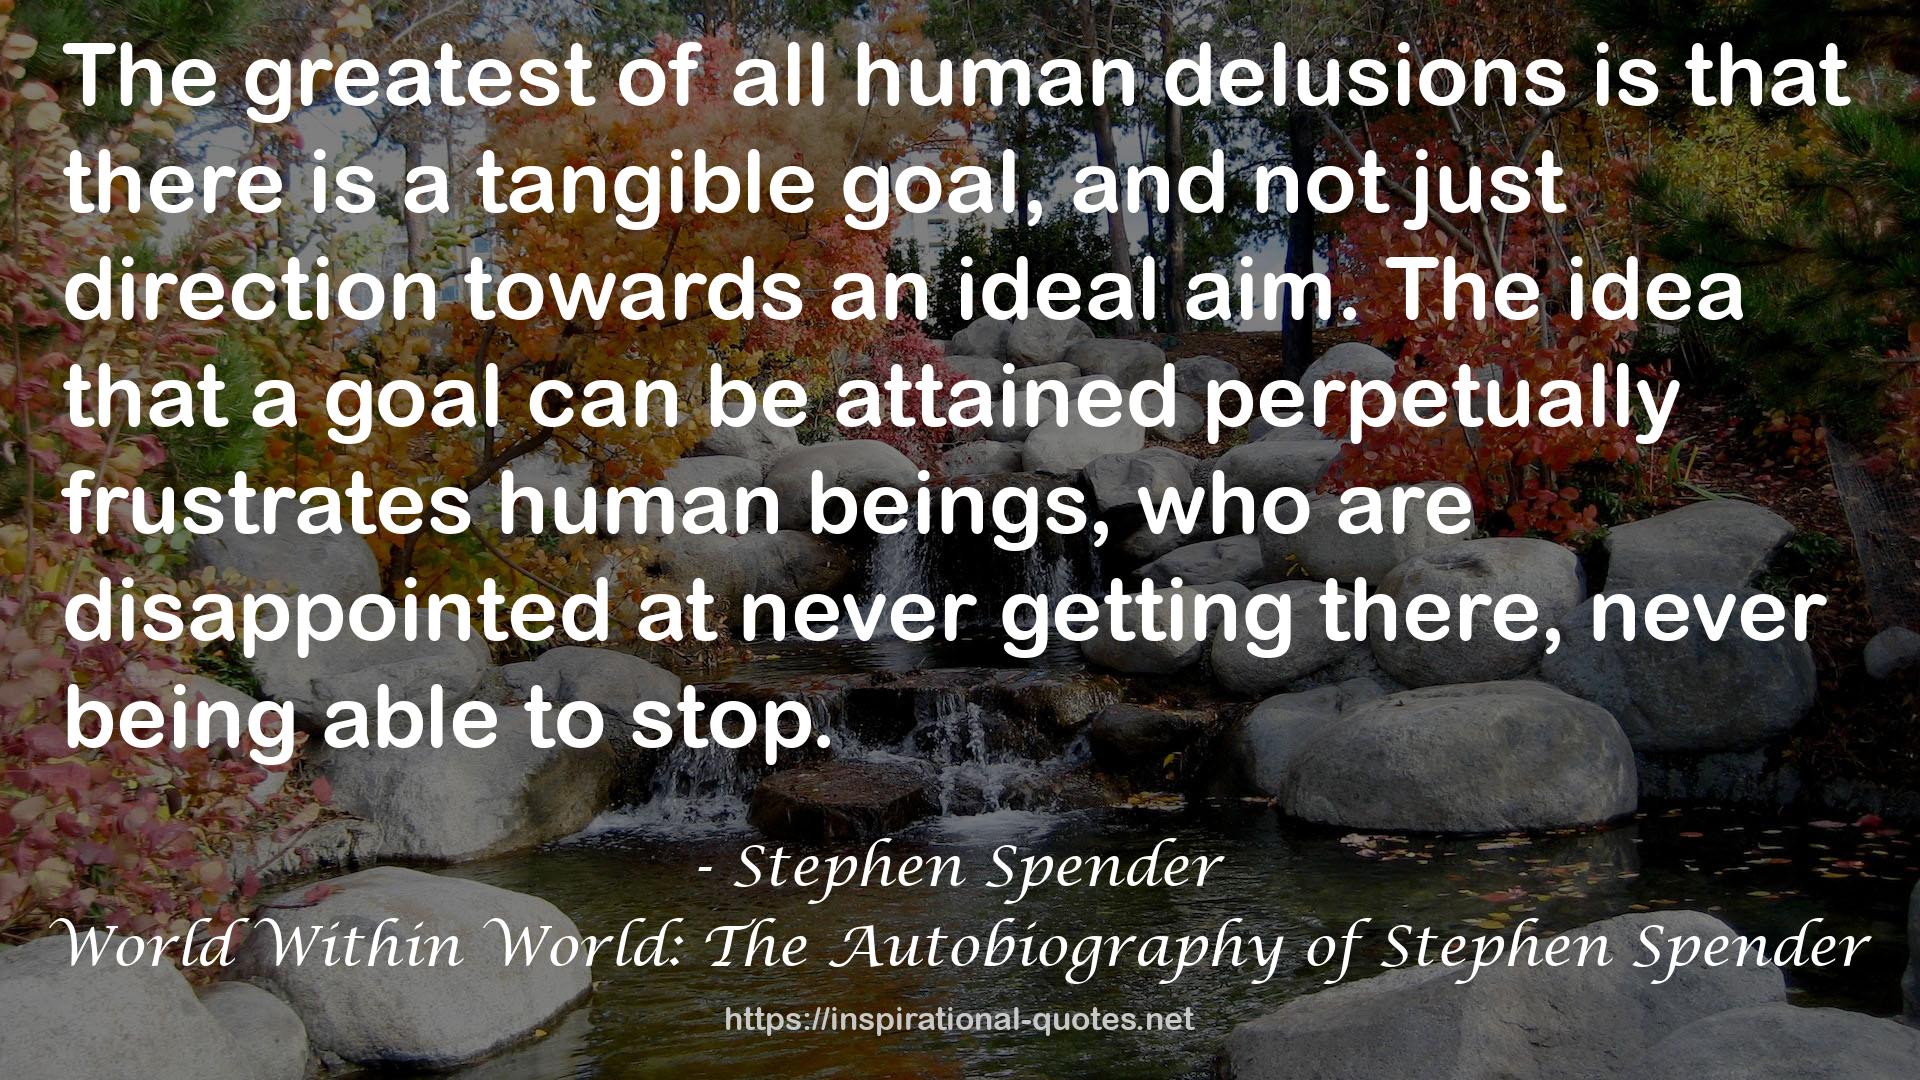 World Within World: The Autobiography of Stephen Spender QUOTES